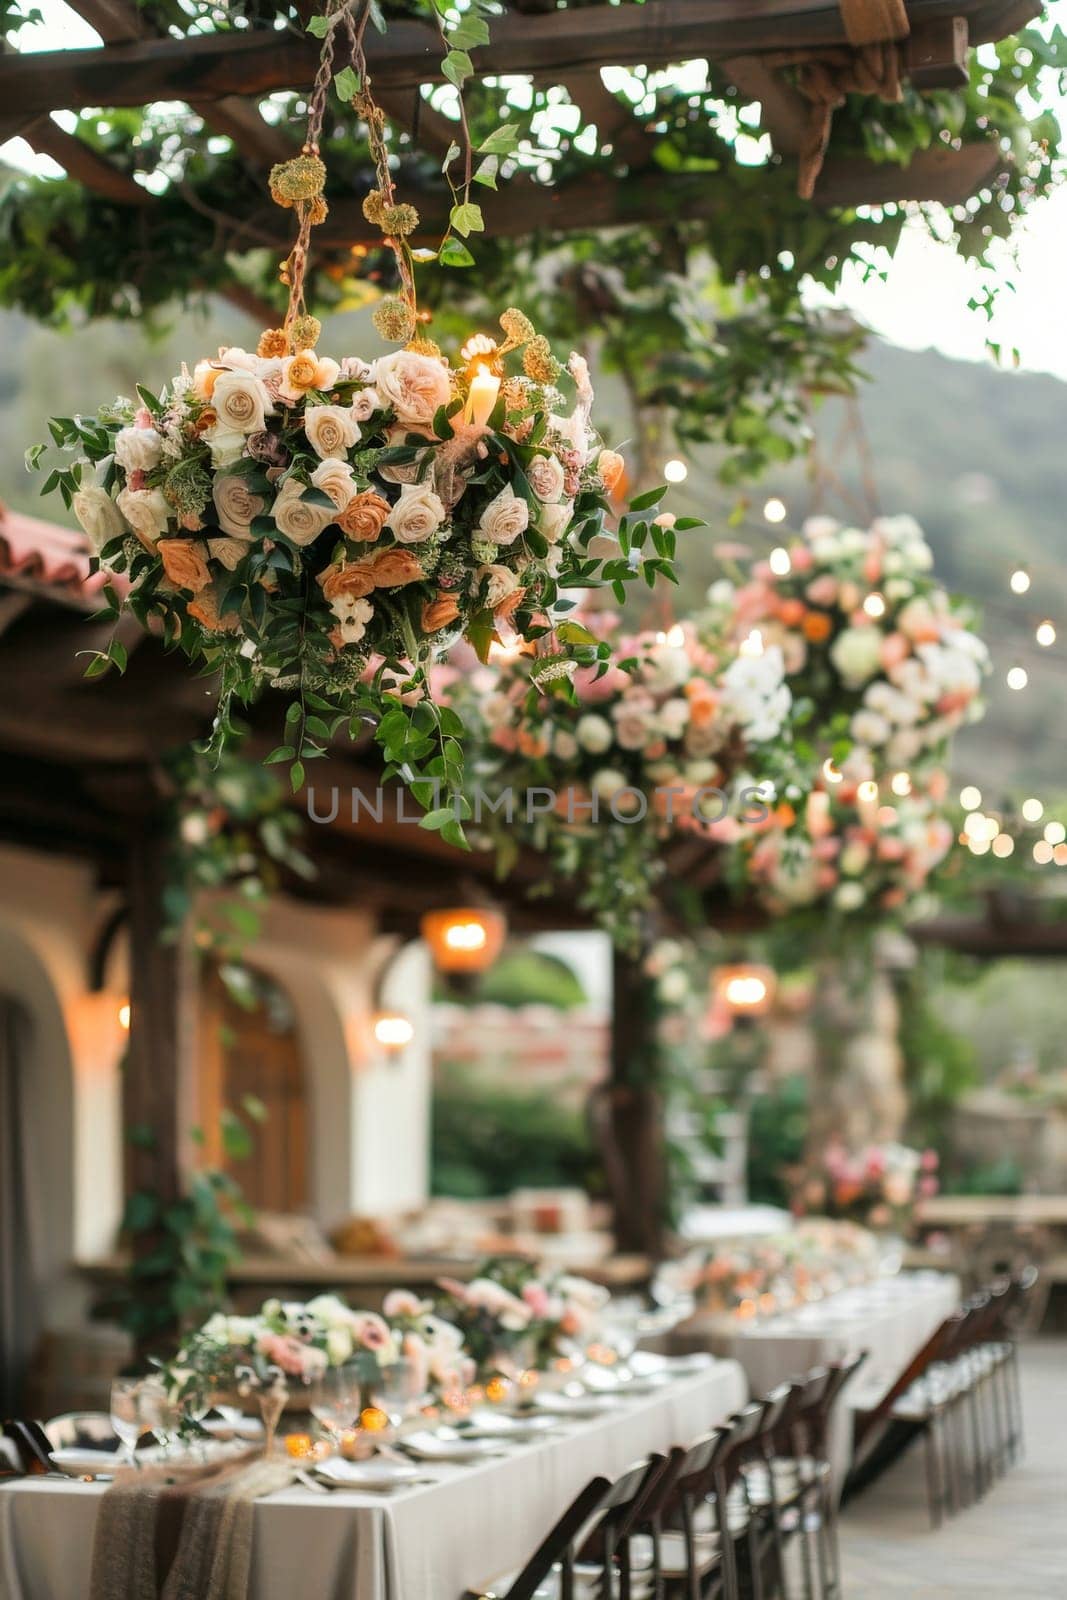 A large outdoor wedding reception with a lot of flowers and candles. The tables are set up with white tablecloths and plates, and there are chairs around the tables. The atmosphere is elegant